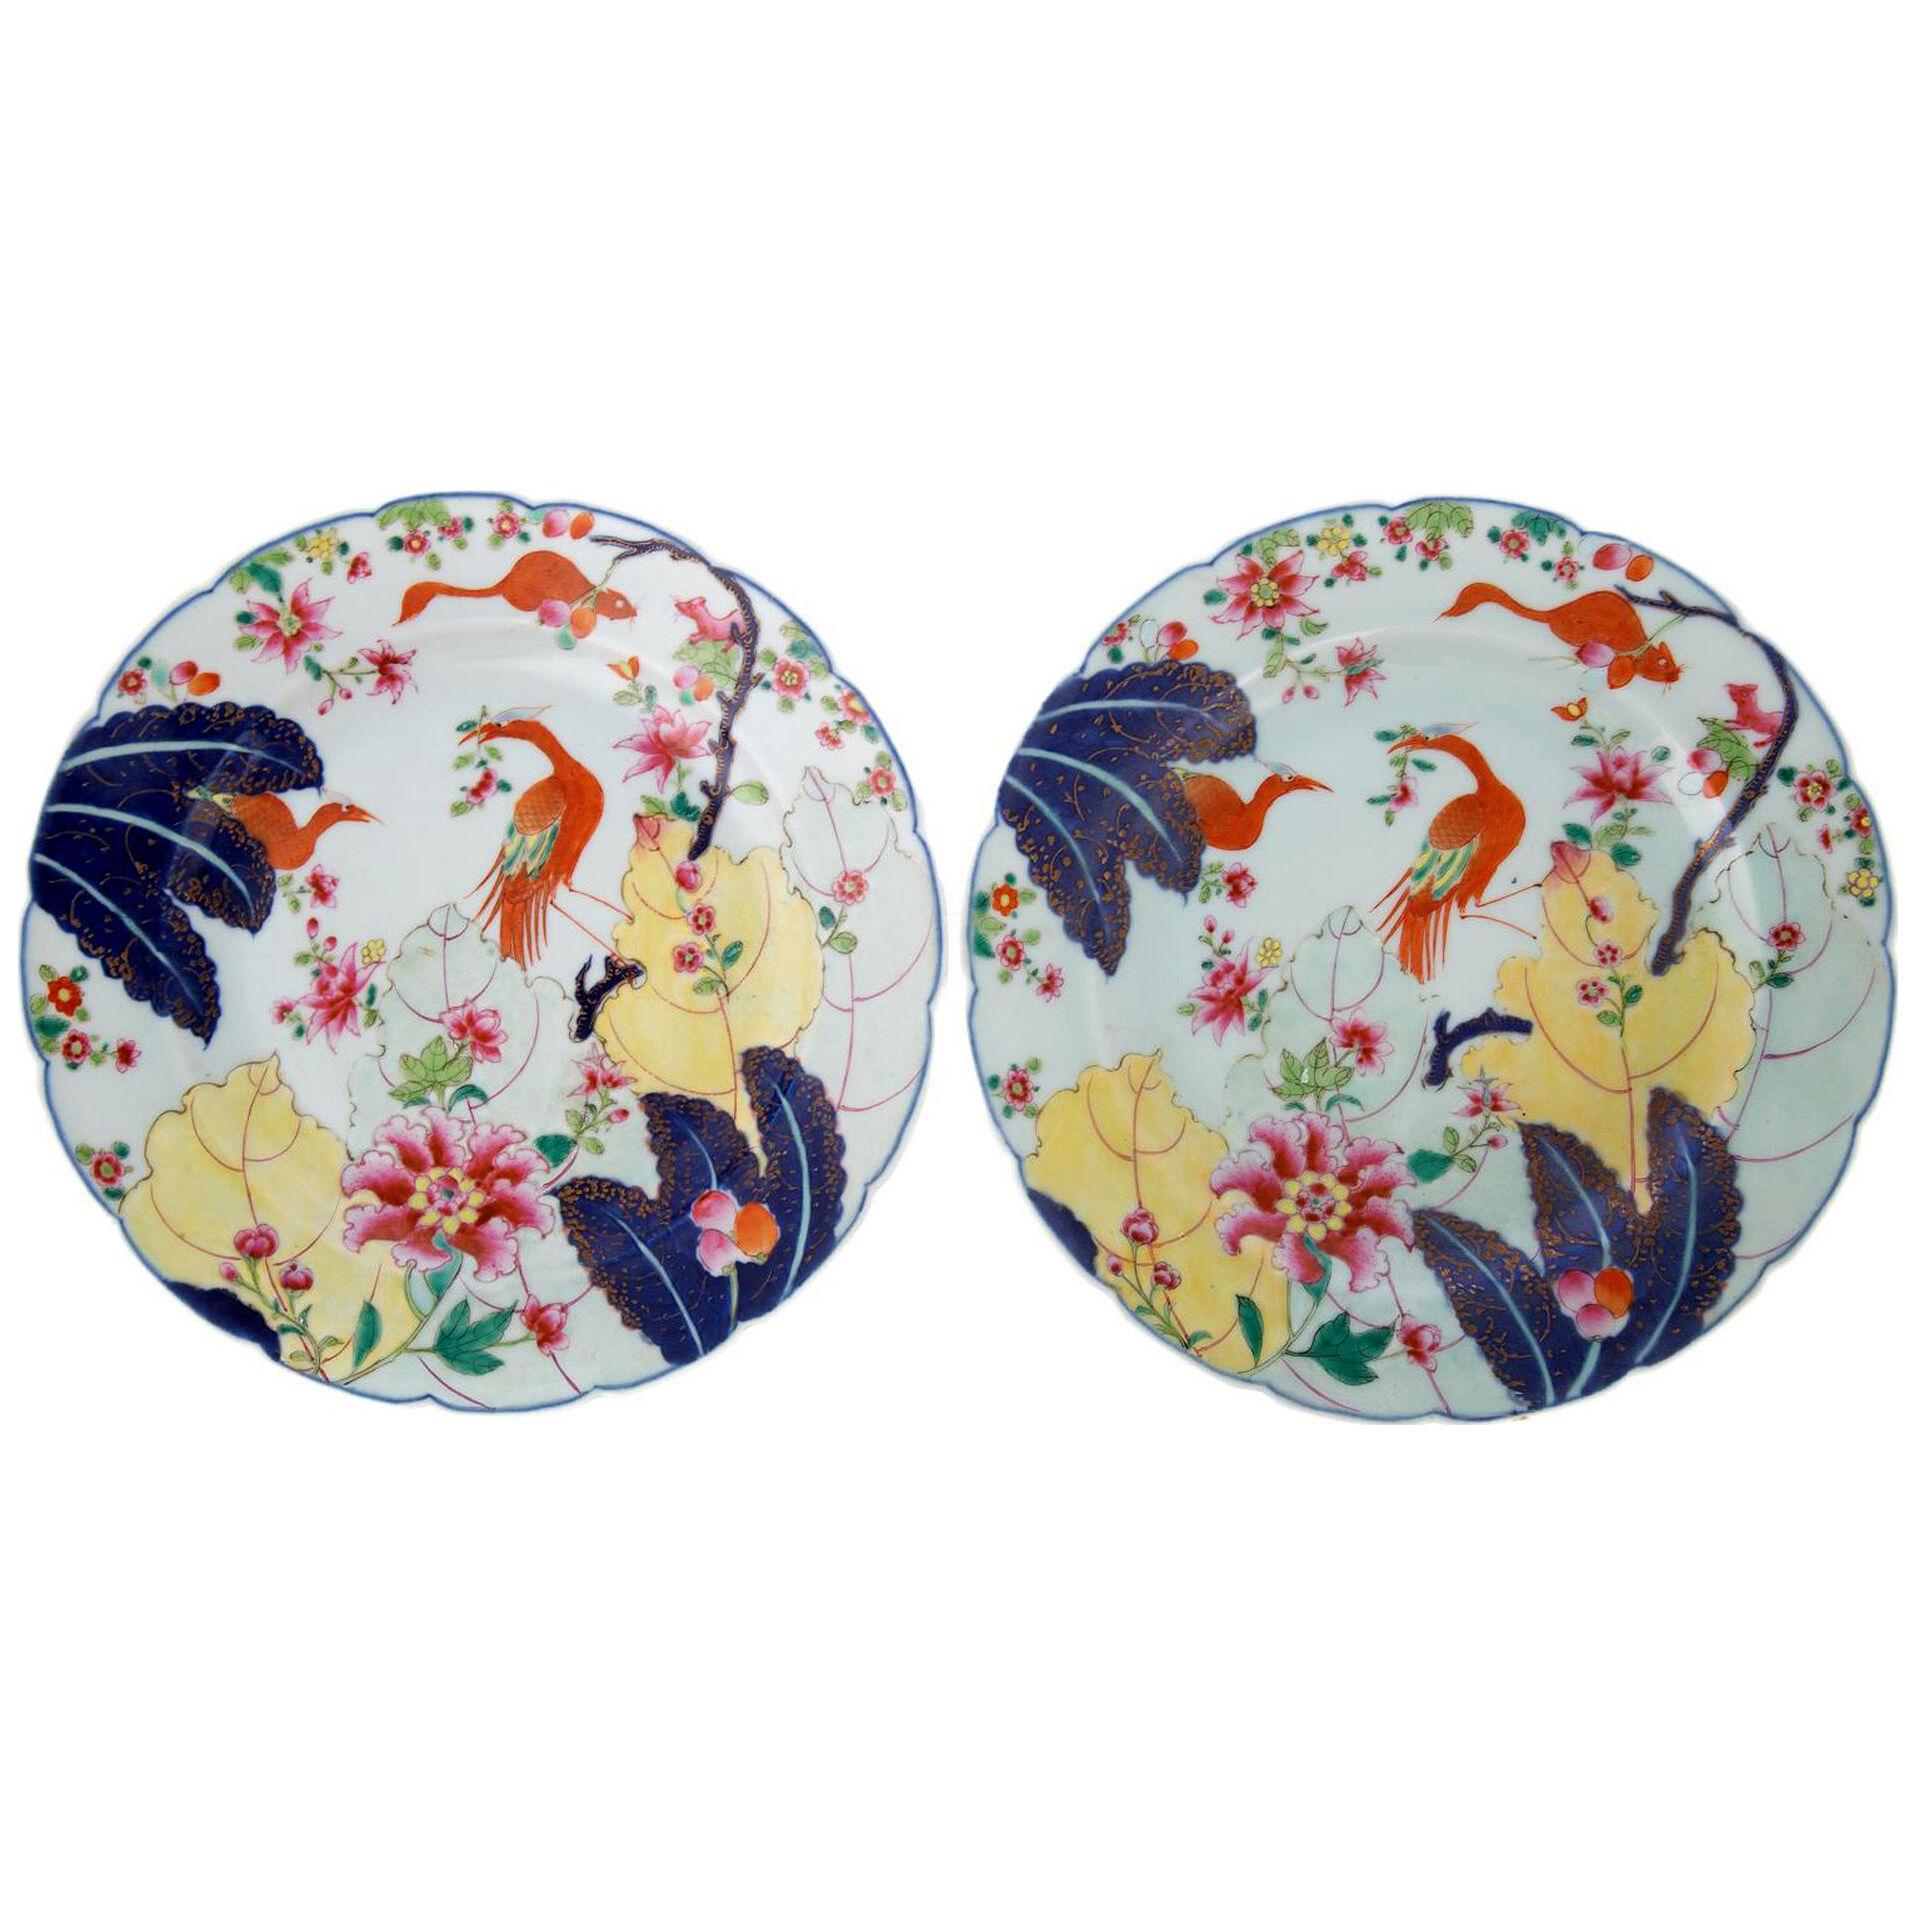 Chinese Export Porcelain Tobacco Leaf Plates